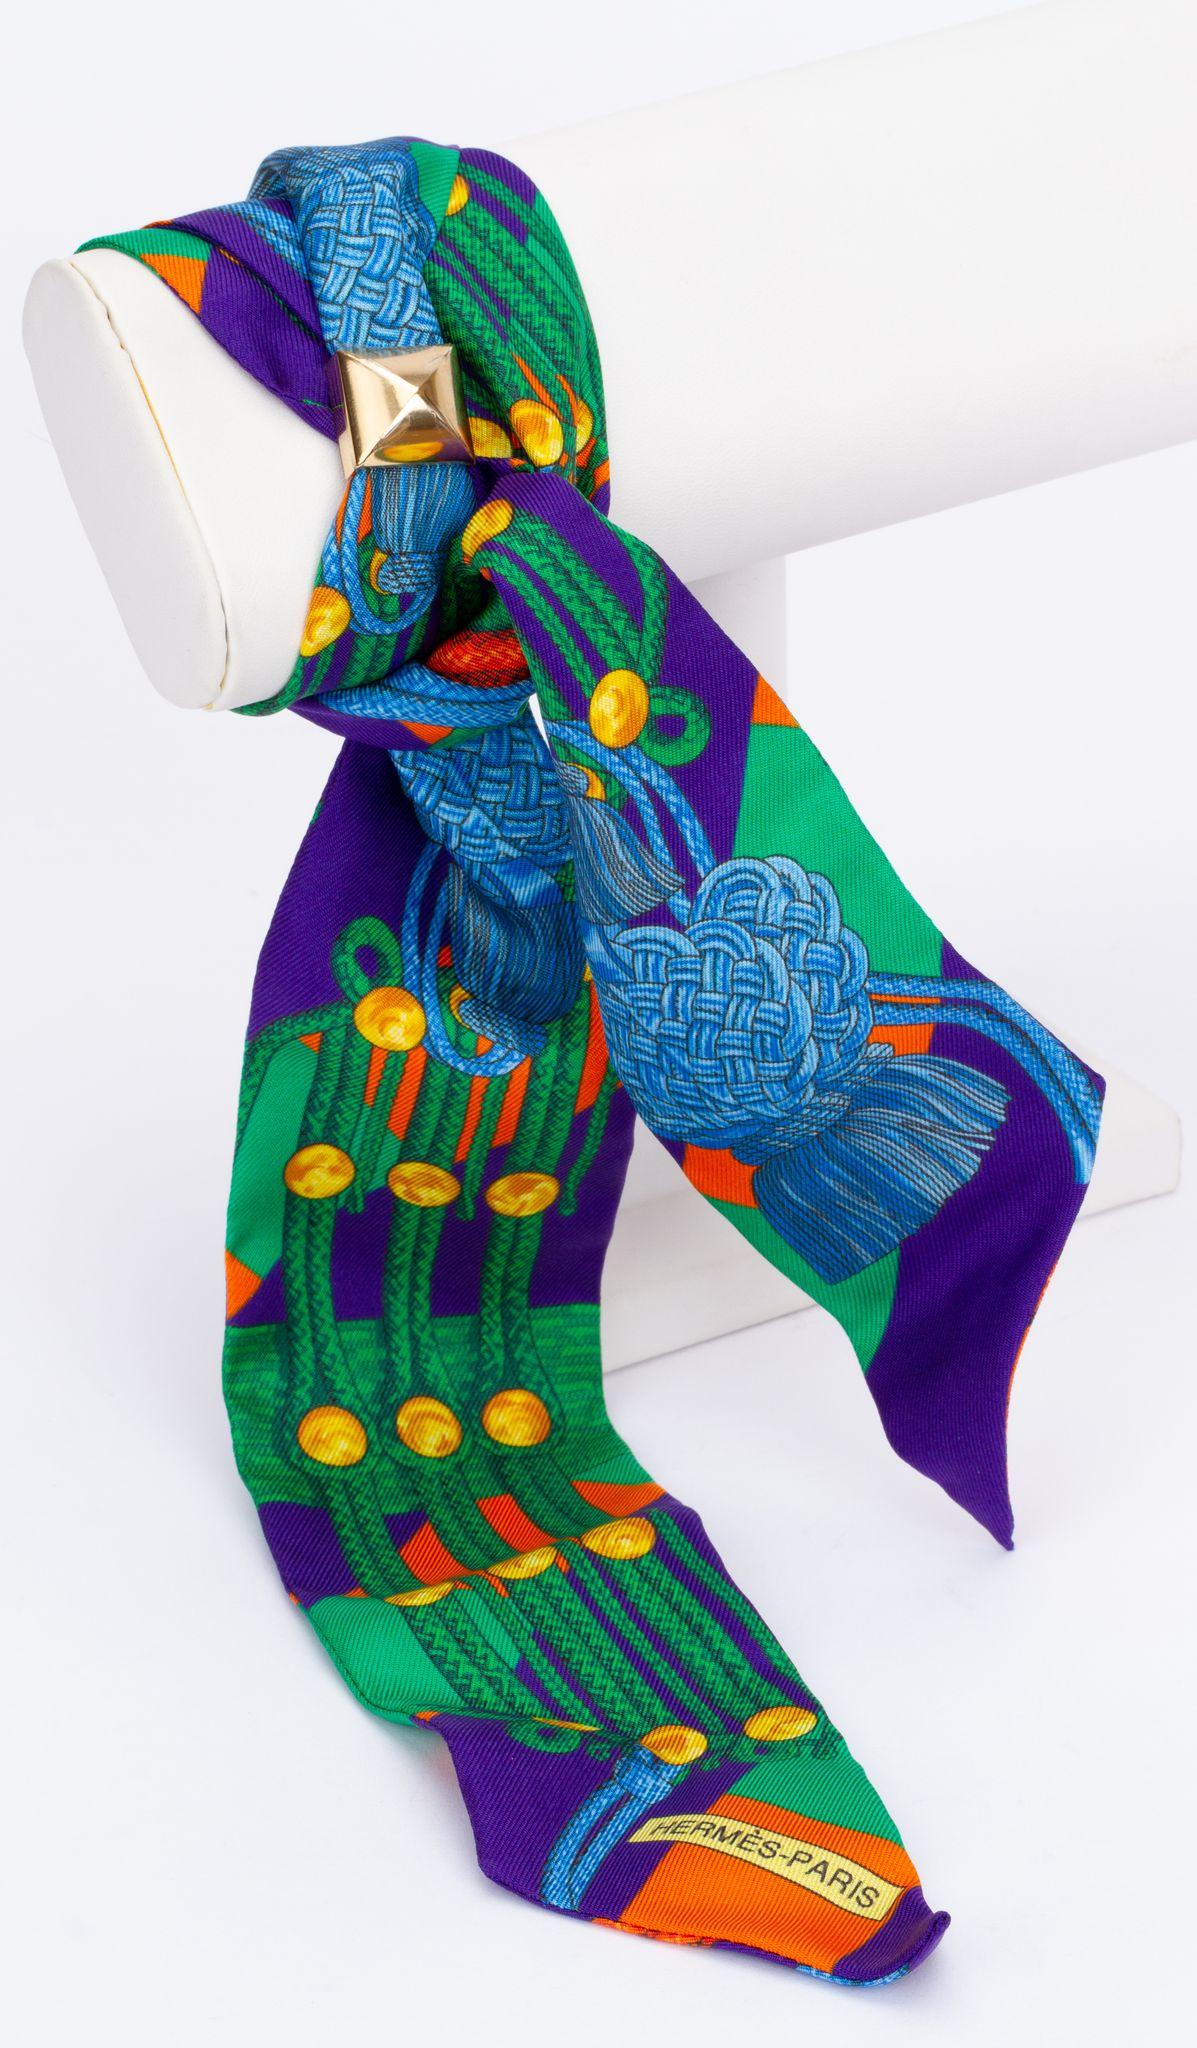 New Hermès Brandebourg Twilly. The scarf is made out of silk and the main color is a green/blue. The print shows the buttons of a military jacket. The piece comes with a scarf ring. It is packed in a original box and ribbon.